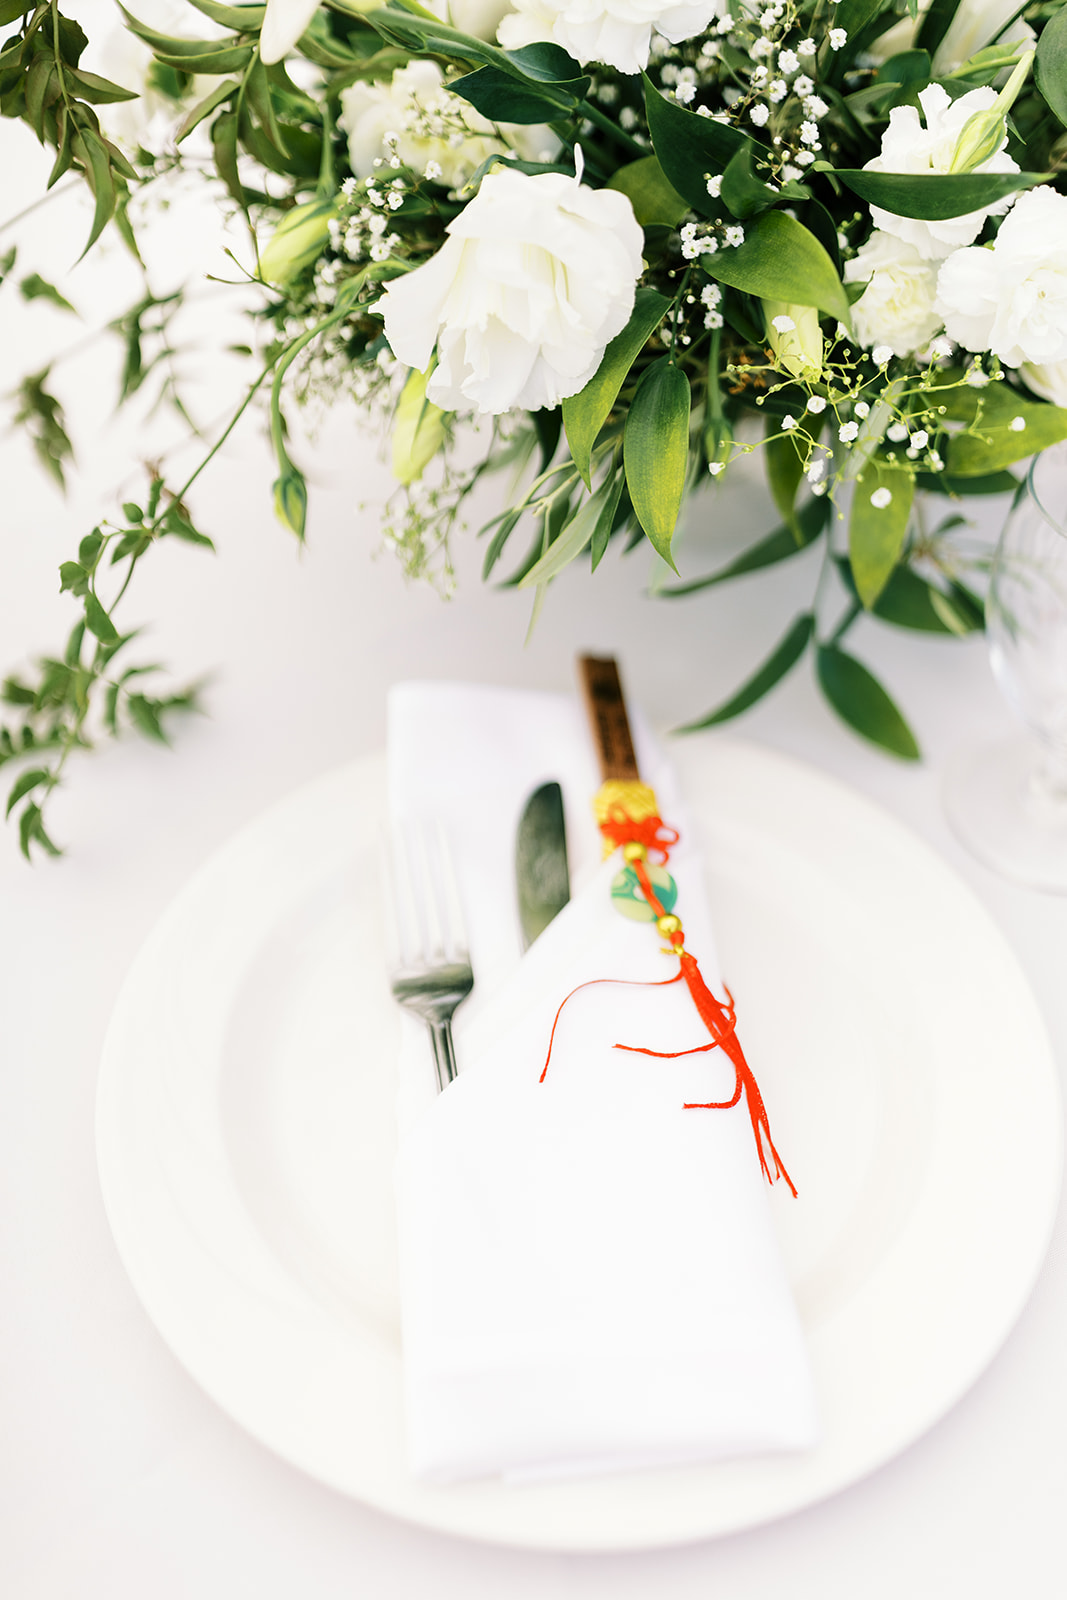 An elegant table setting with a white plate, silver cutlery, a white napkin, and a small floral decoration